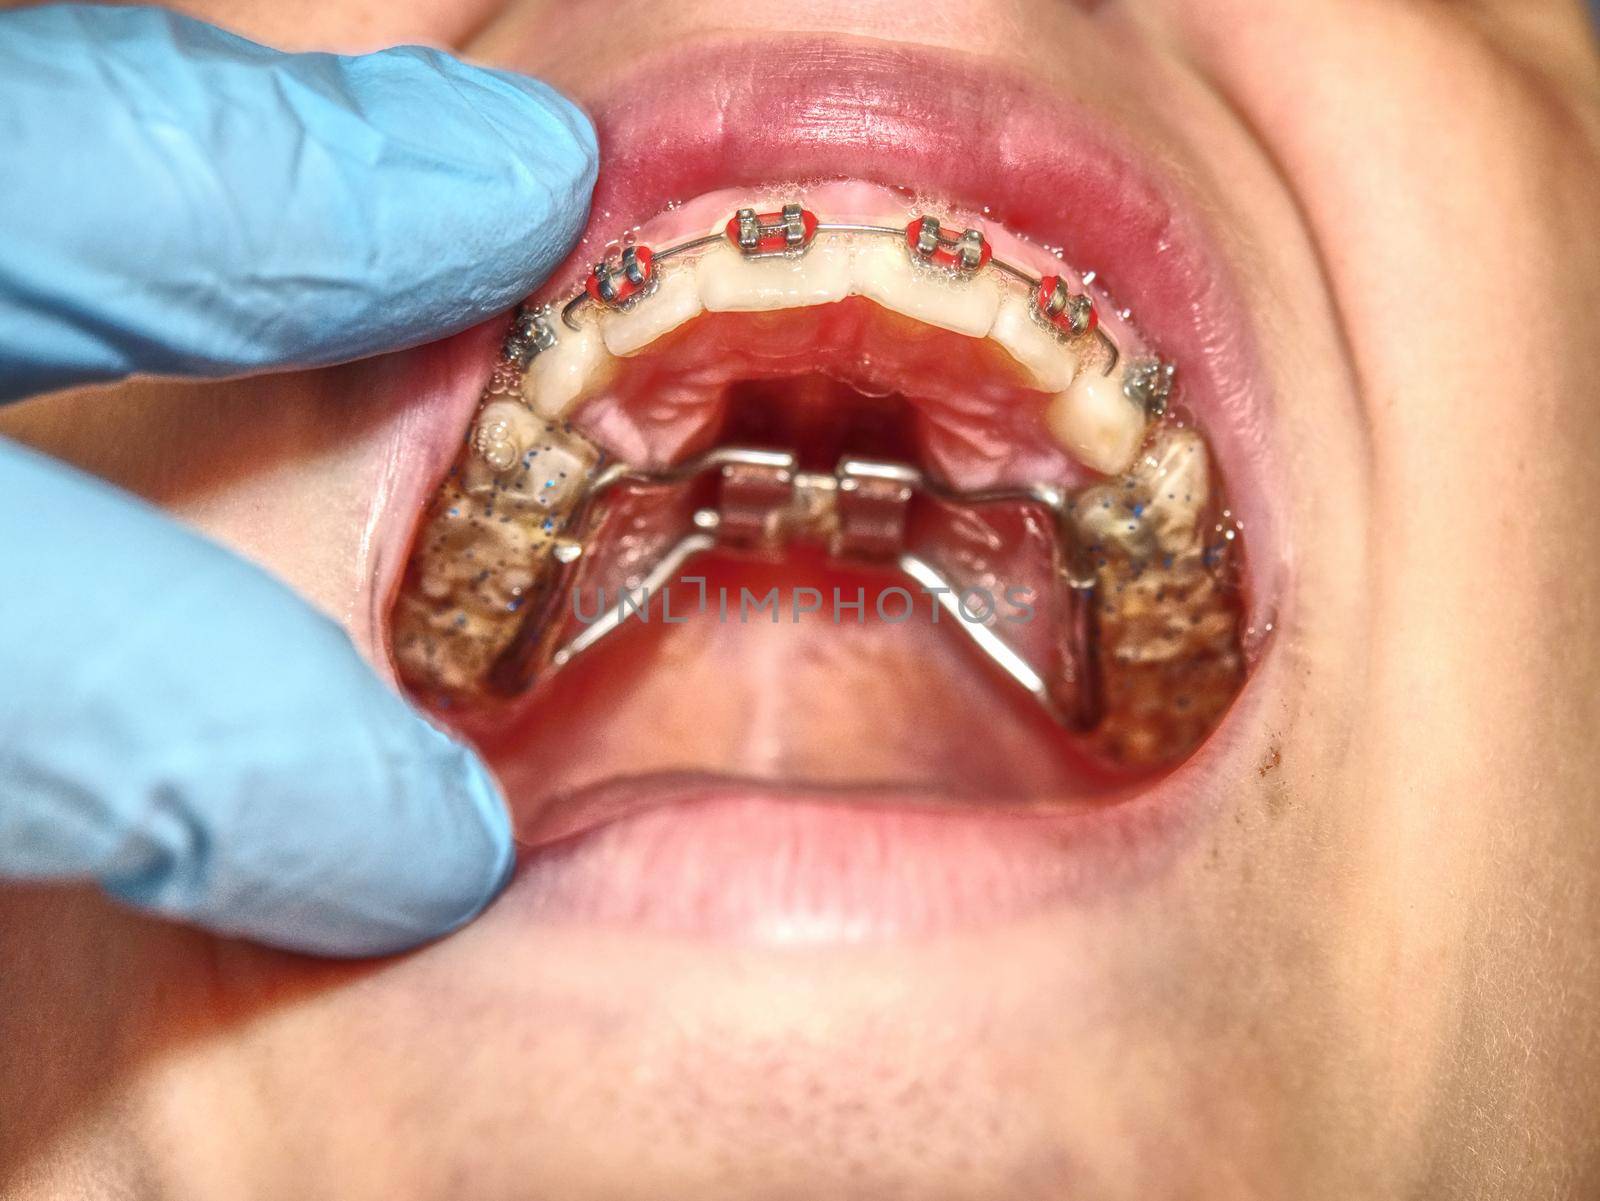 Patient with  dental braces during check or  treatment by rdonar2